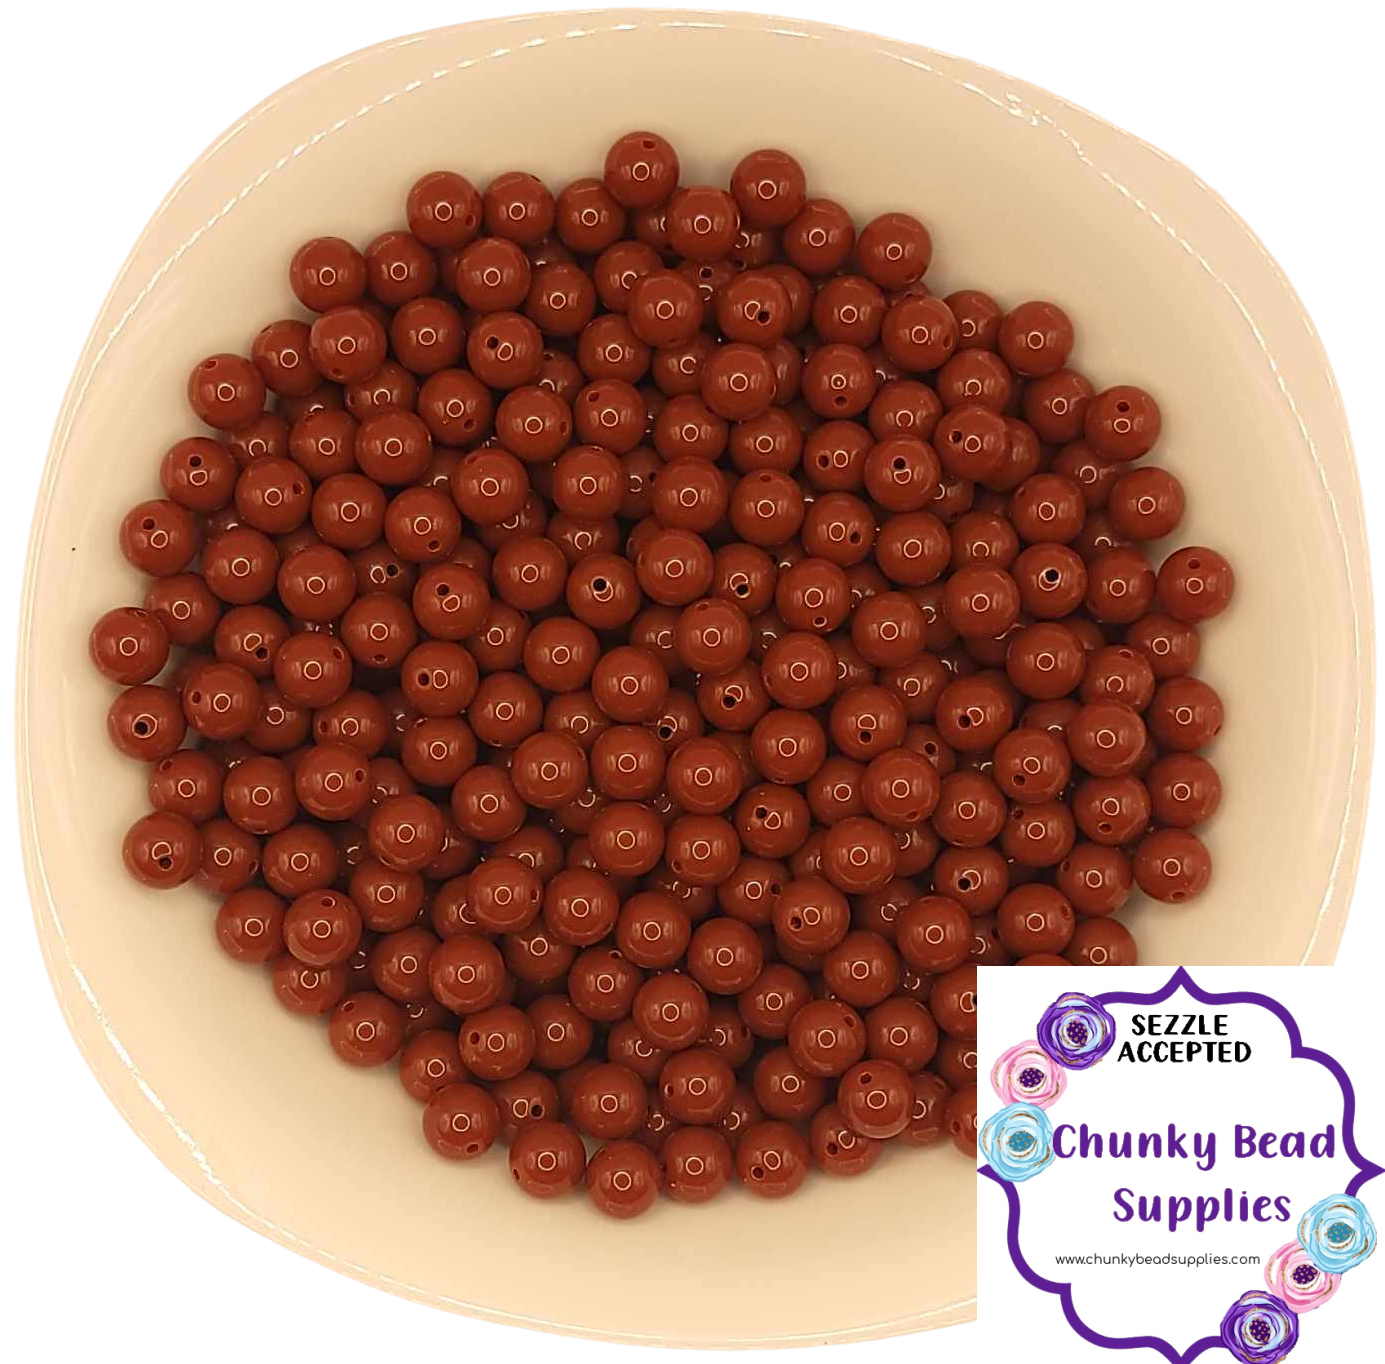 12mm “Copper Brown” Solid Acrylic Beads, CBS Chunky Bead Supplies, Gumball Beads, Chunky Bubblegum Beads